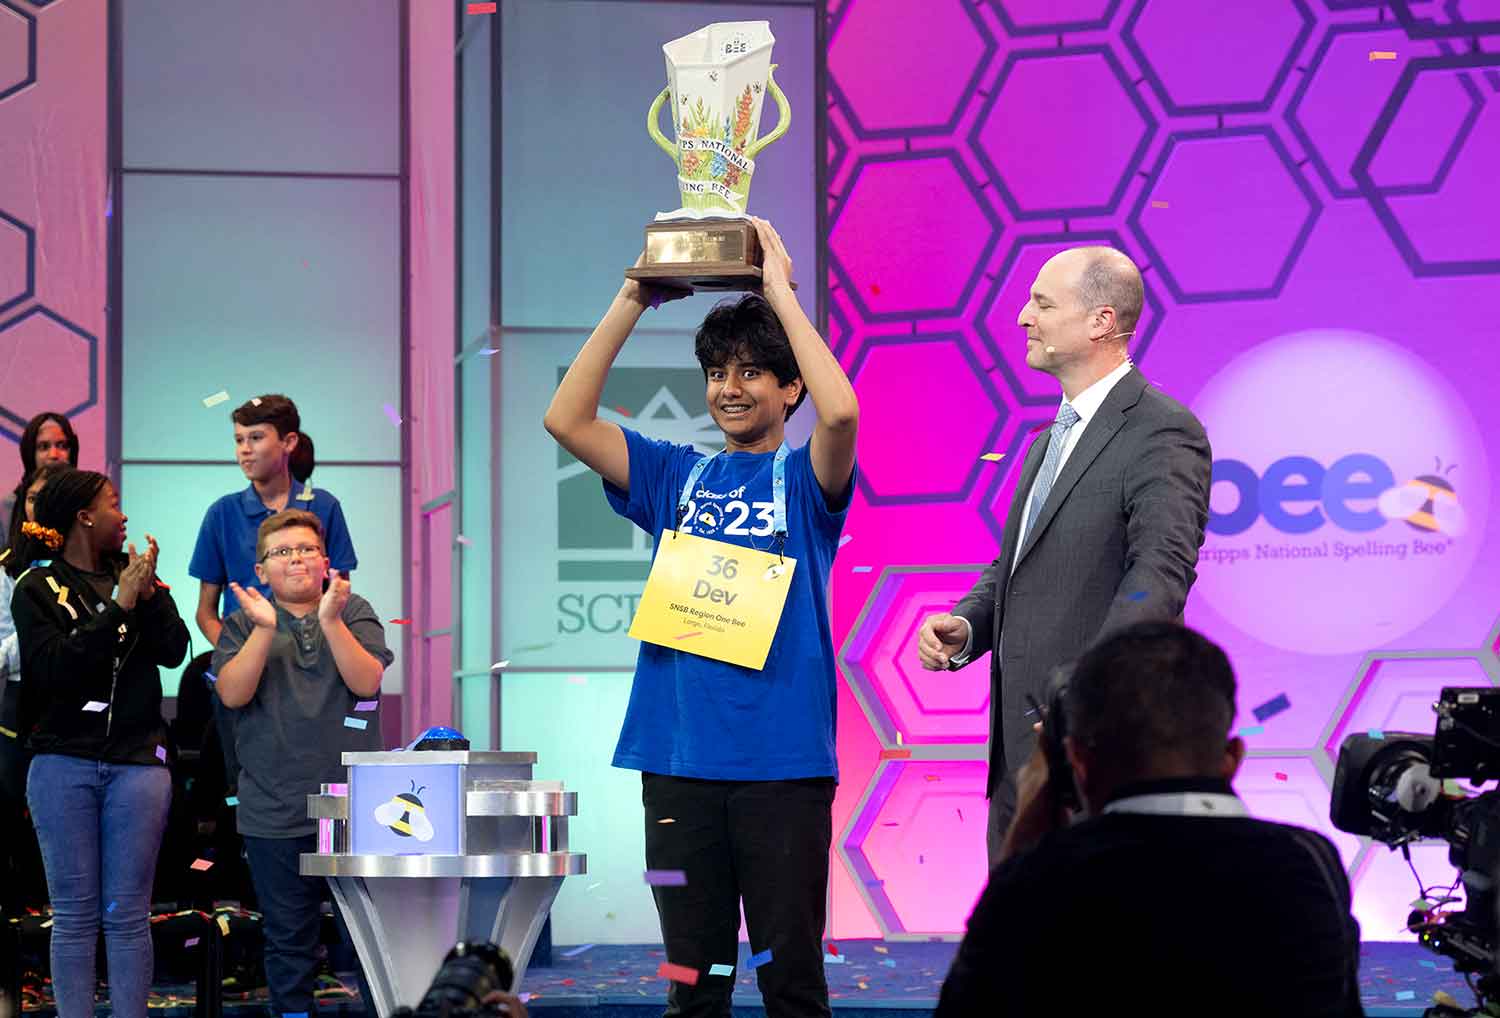 A teen on a stage smiles and holds up a trophy as an audience and other teens clap.